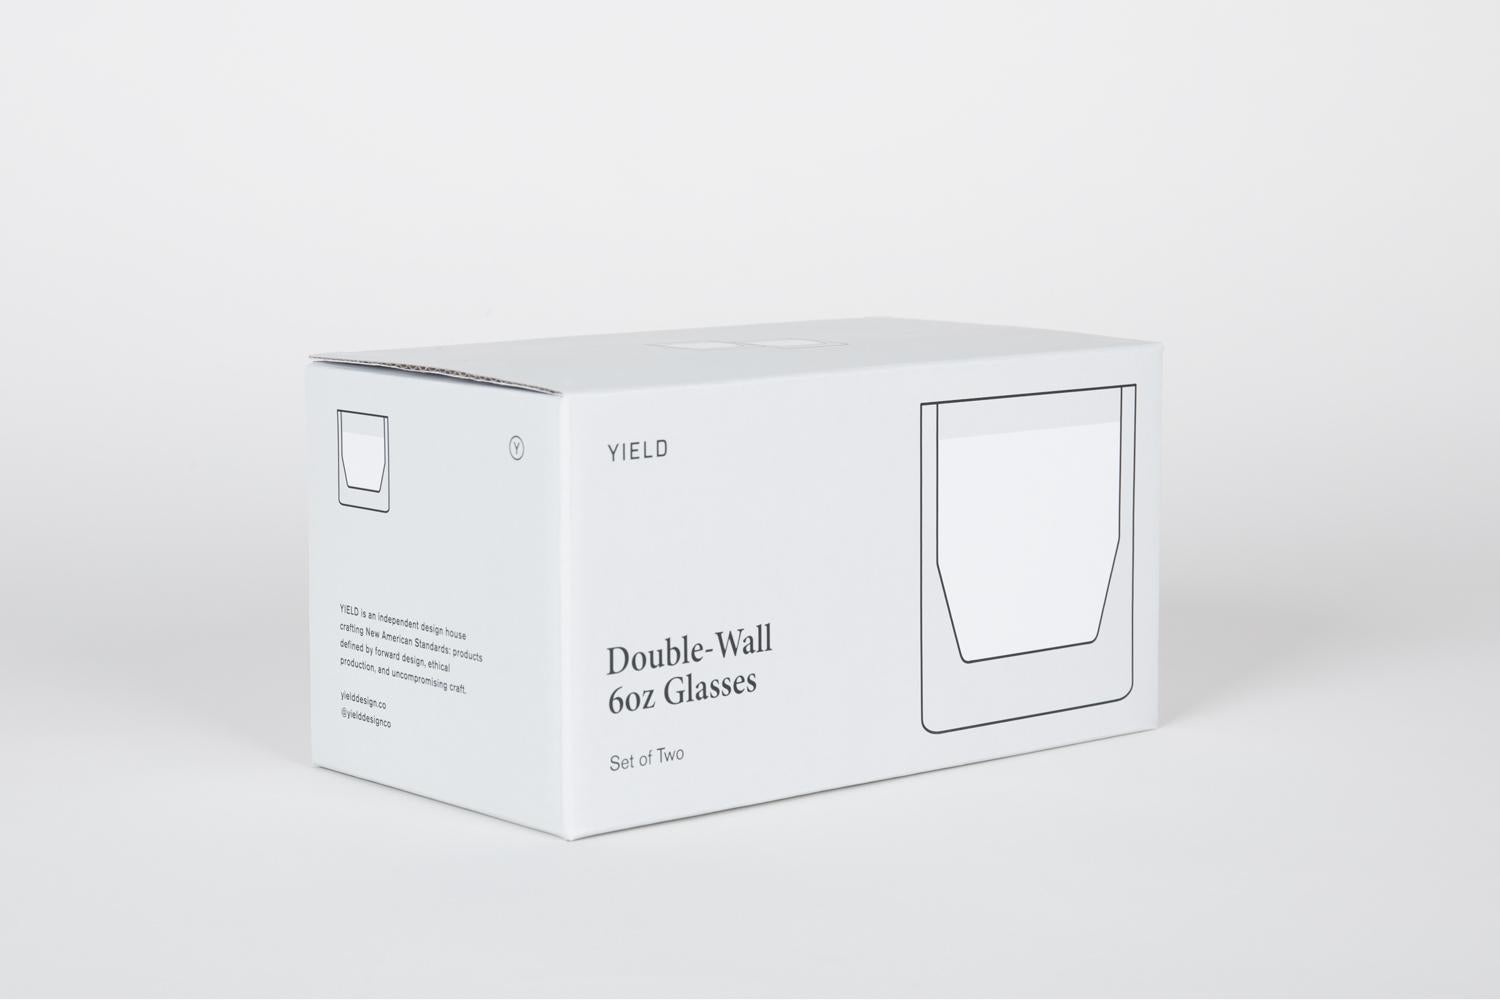 Sold as a set of two glasses.

A perfect glass for any occasion. The double-wall glass provides insulation suitable for use with hot or cold drinks. Double-wall glass insulates for a cool to touch experience without the need for a handle. The form